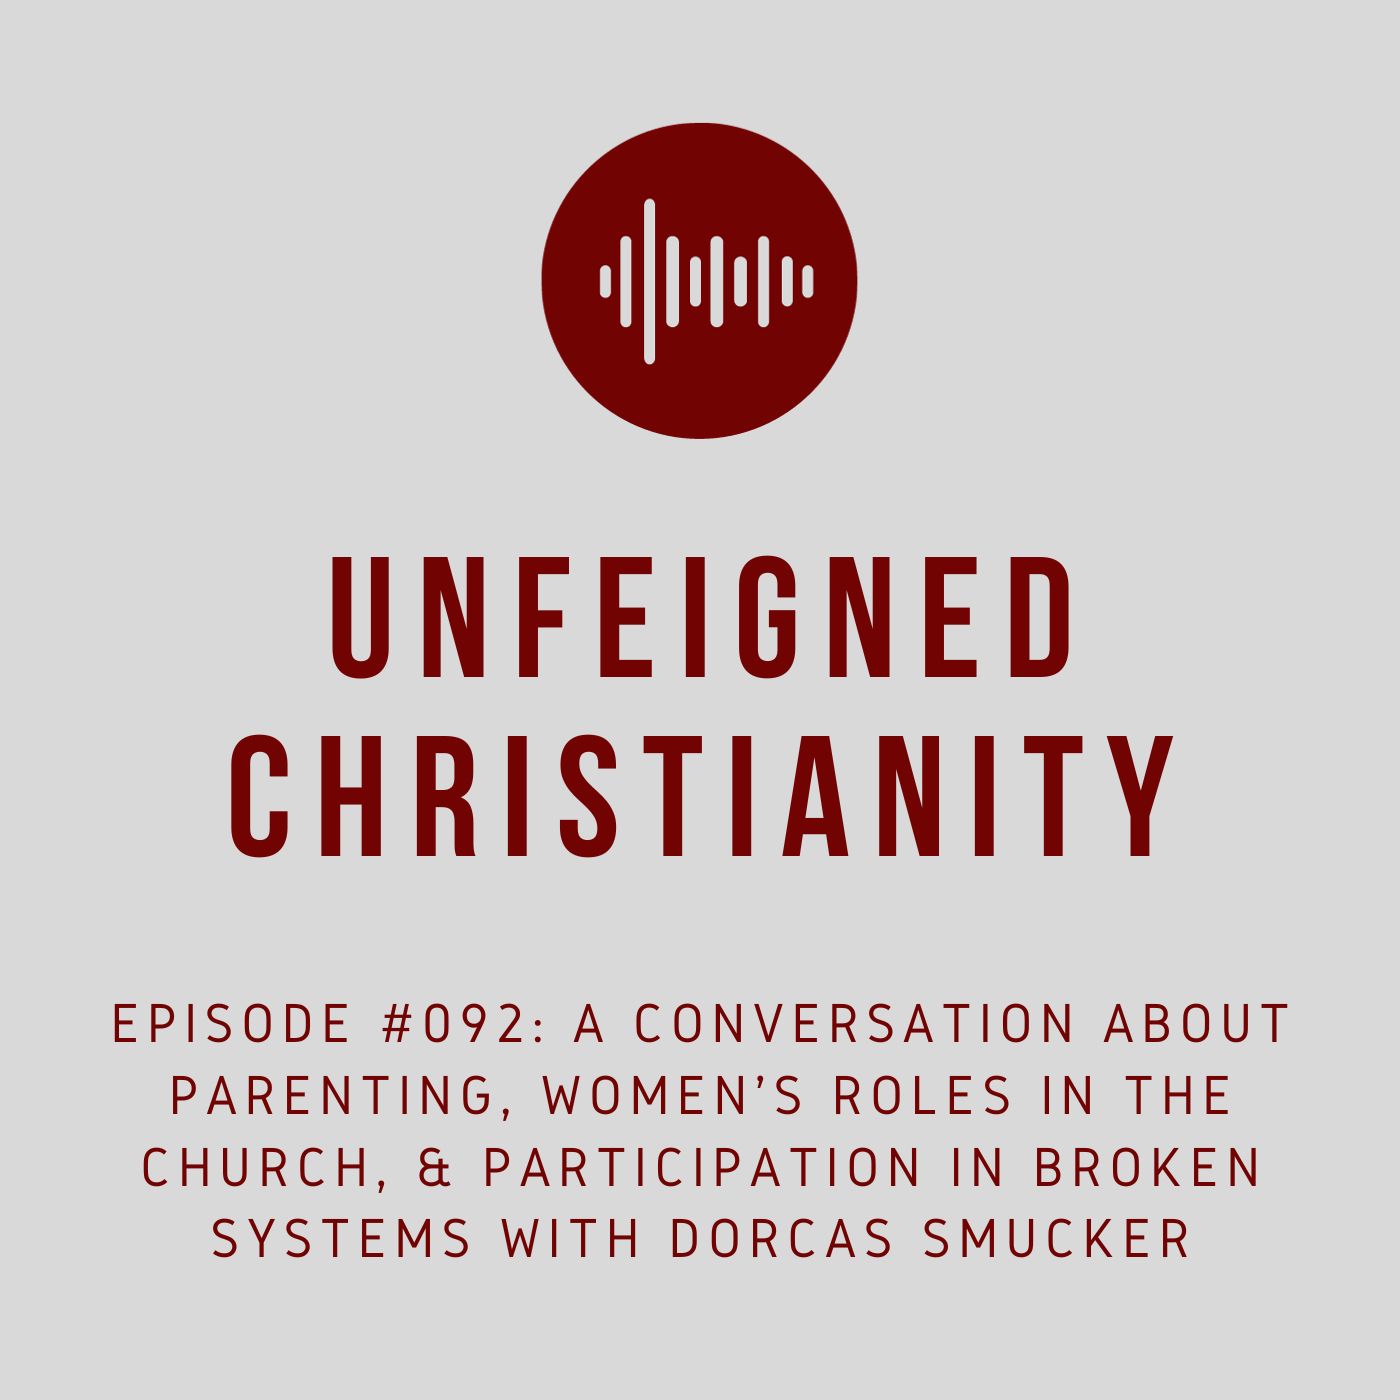 #092 - A Conversation about Parenting, Women’s Roles in the Church, & Participation in Broken Systems with Dorcas Smucker